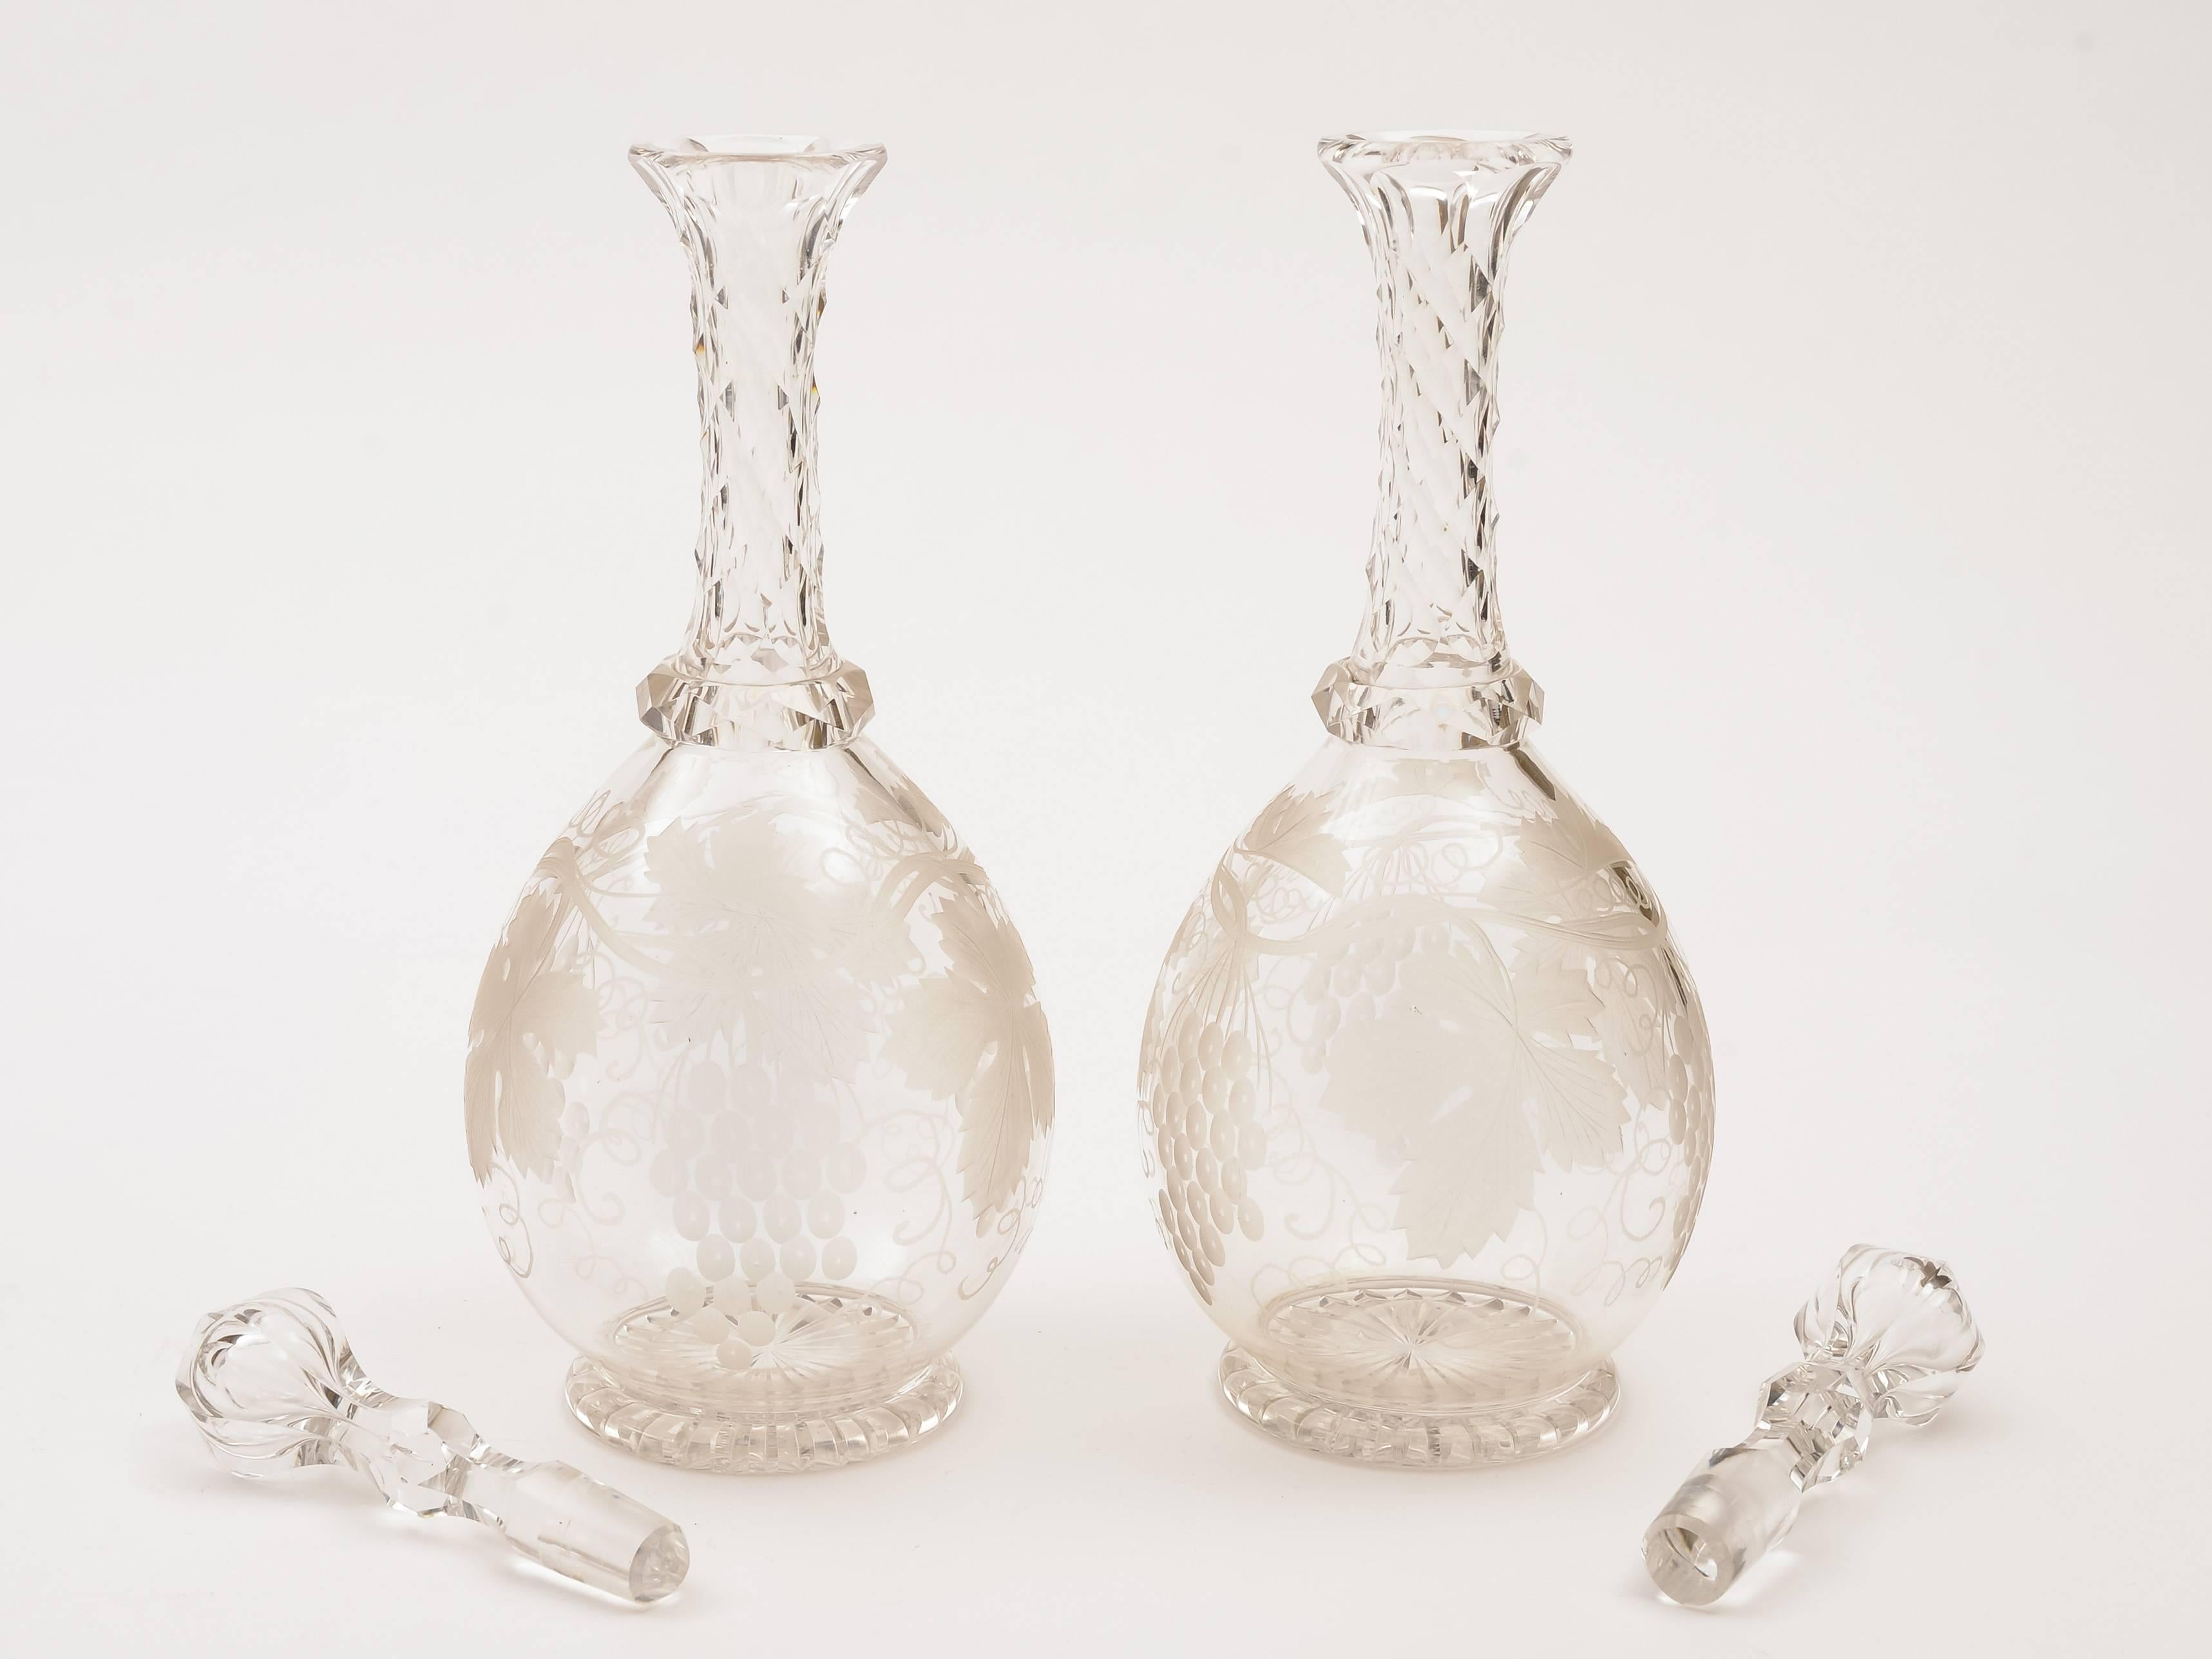 A beautiful English Edwardian pair of glass decanters with lovely etched grape and vine decoration to body, elegant and long, slender cut-glass necks and original stoppers with star cut bases, circa 1905.

Measurements:
Height 11